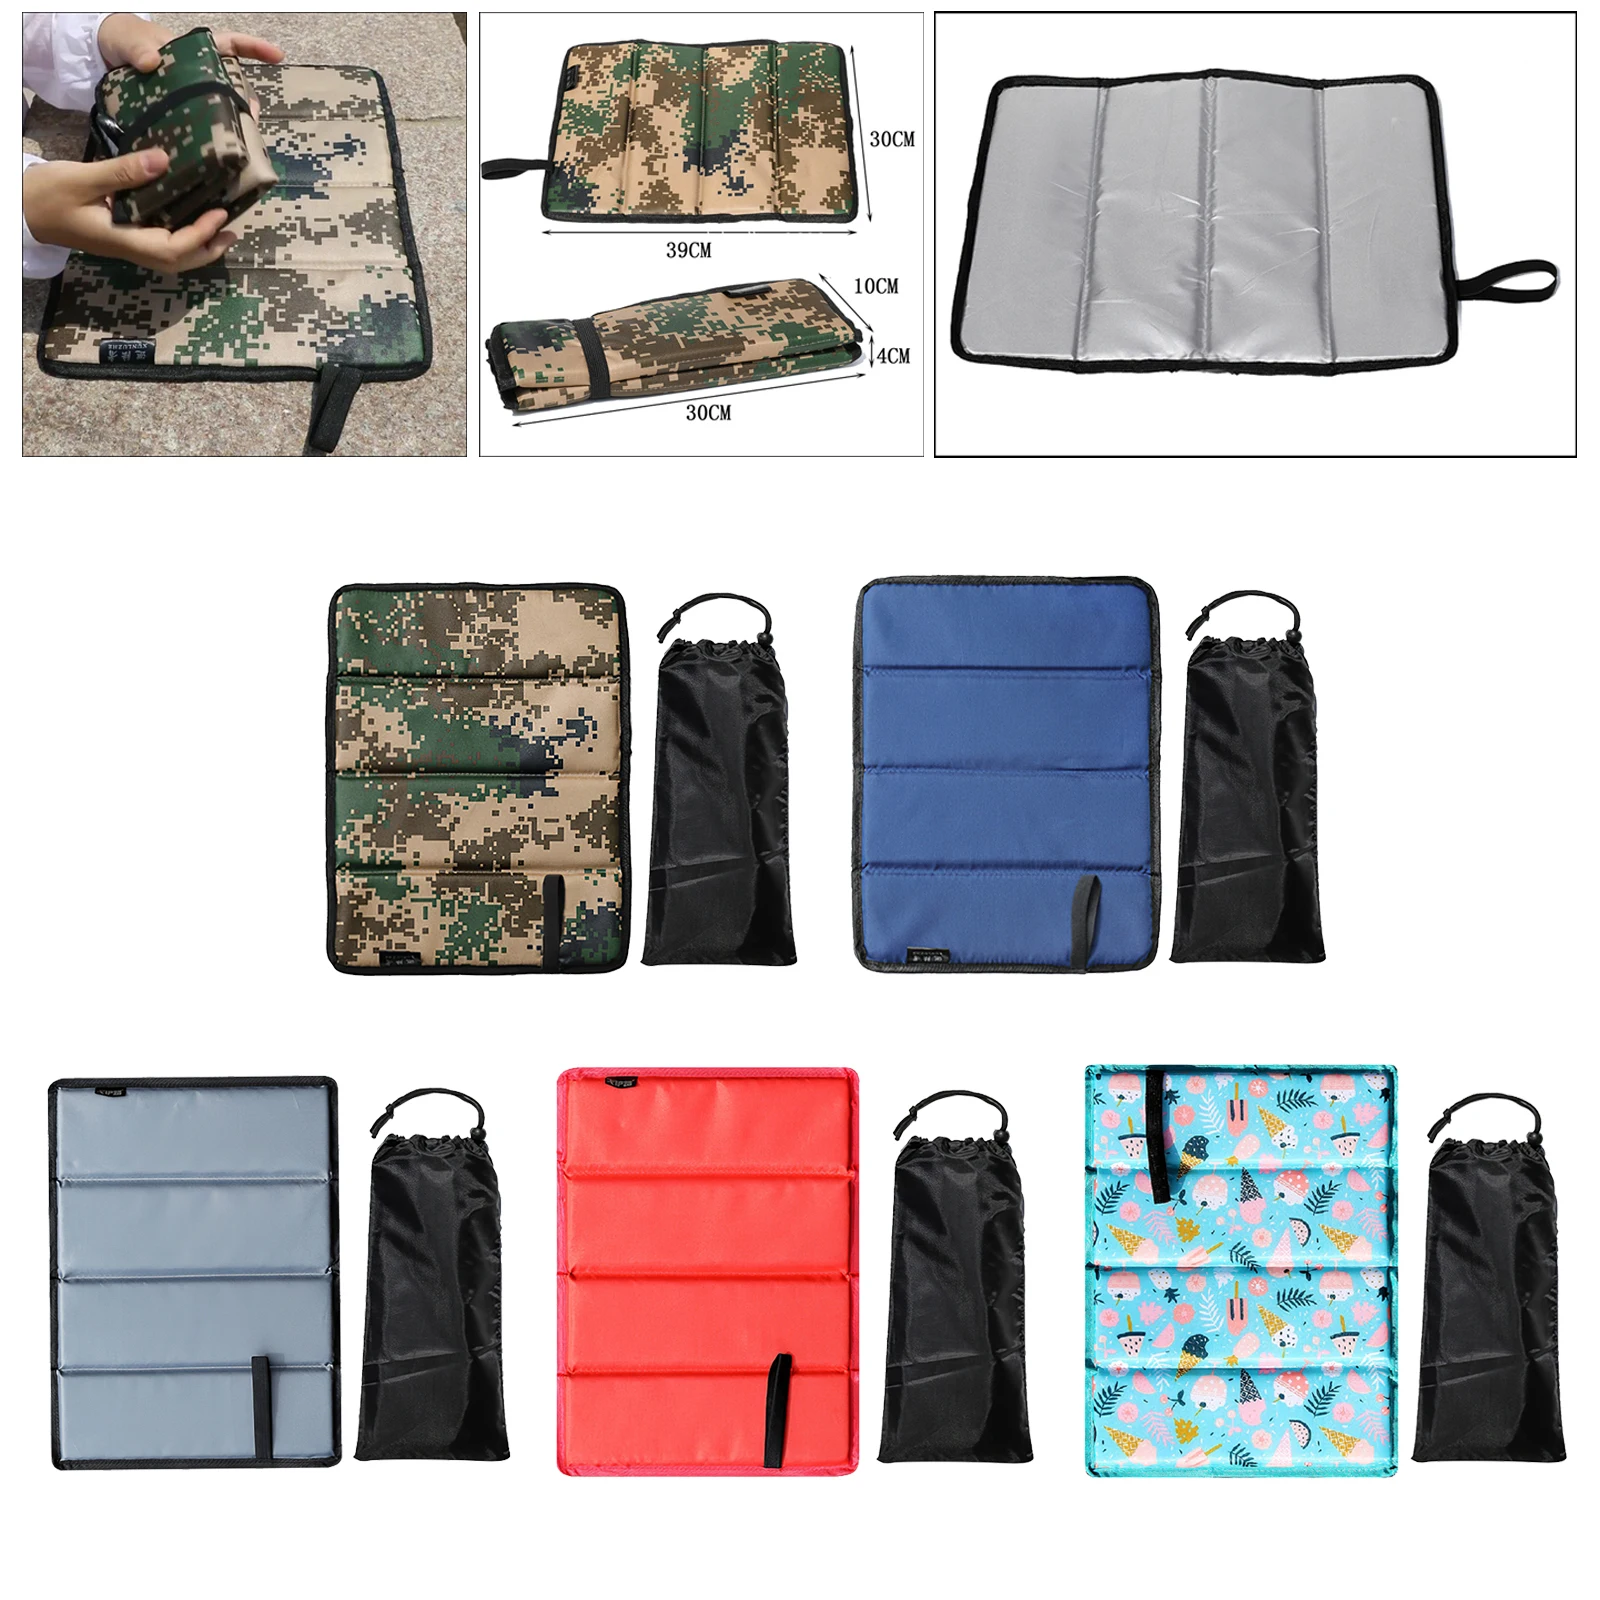 Foldable Seat Pad Camping Foam Seat Cushion Sitting Mat Portable Beach Pad for Outdoor Camping Hiking Travel BBQ Picnic